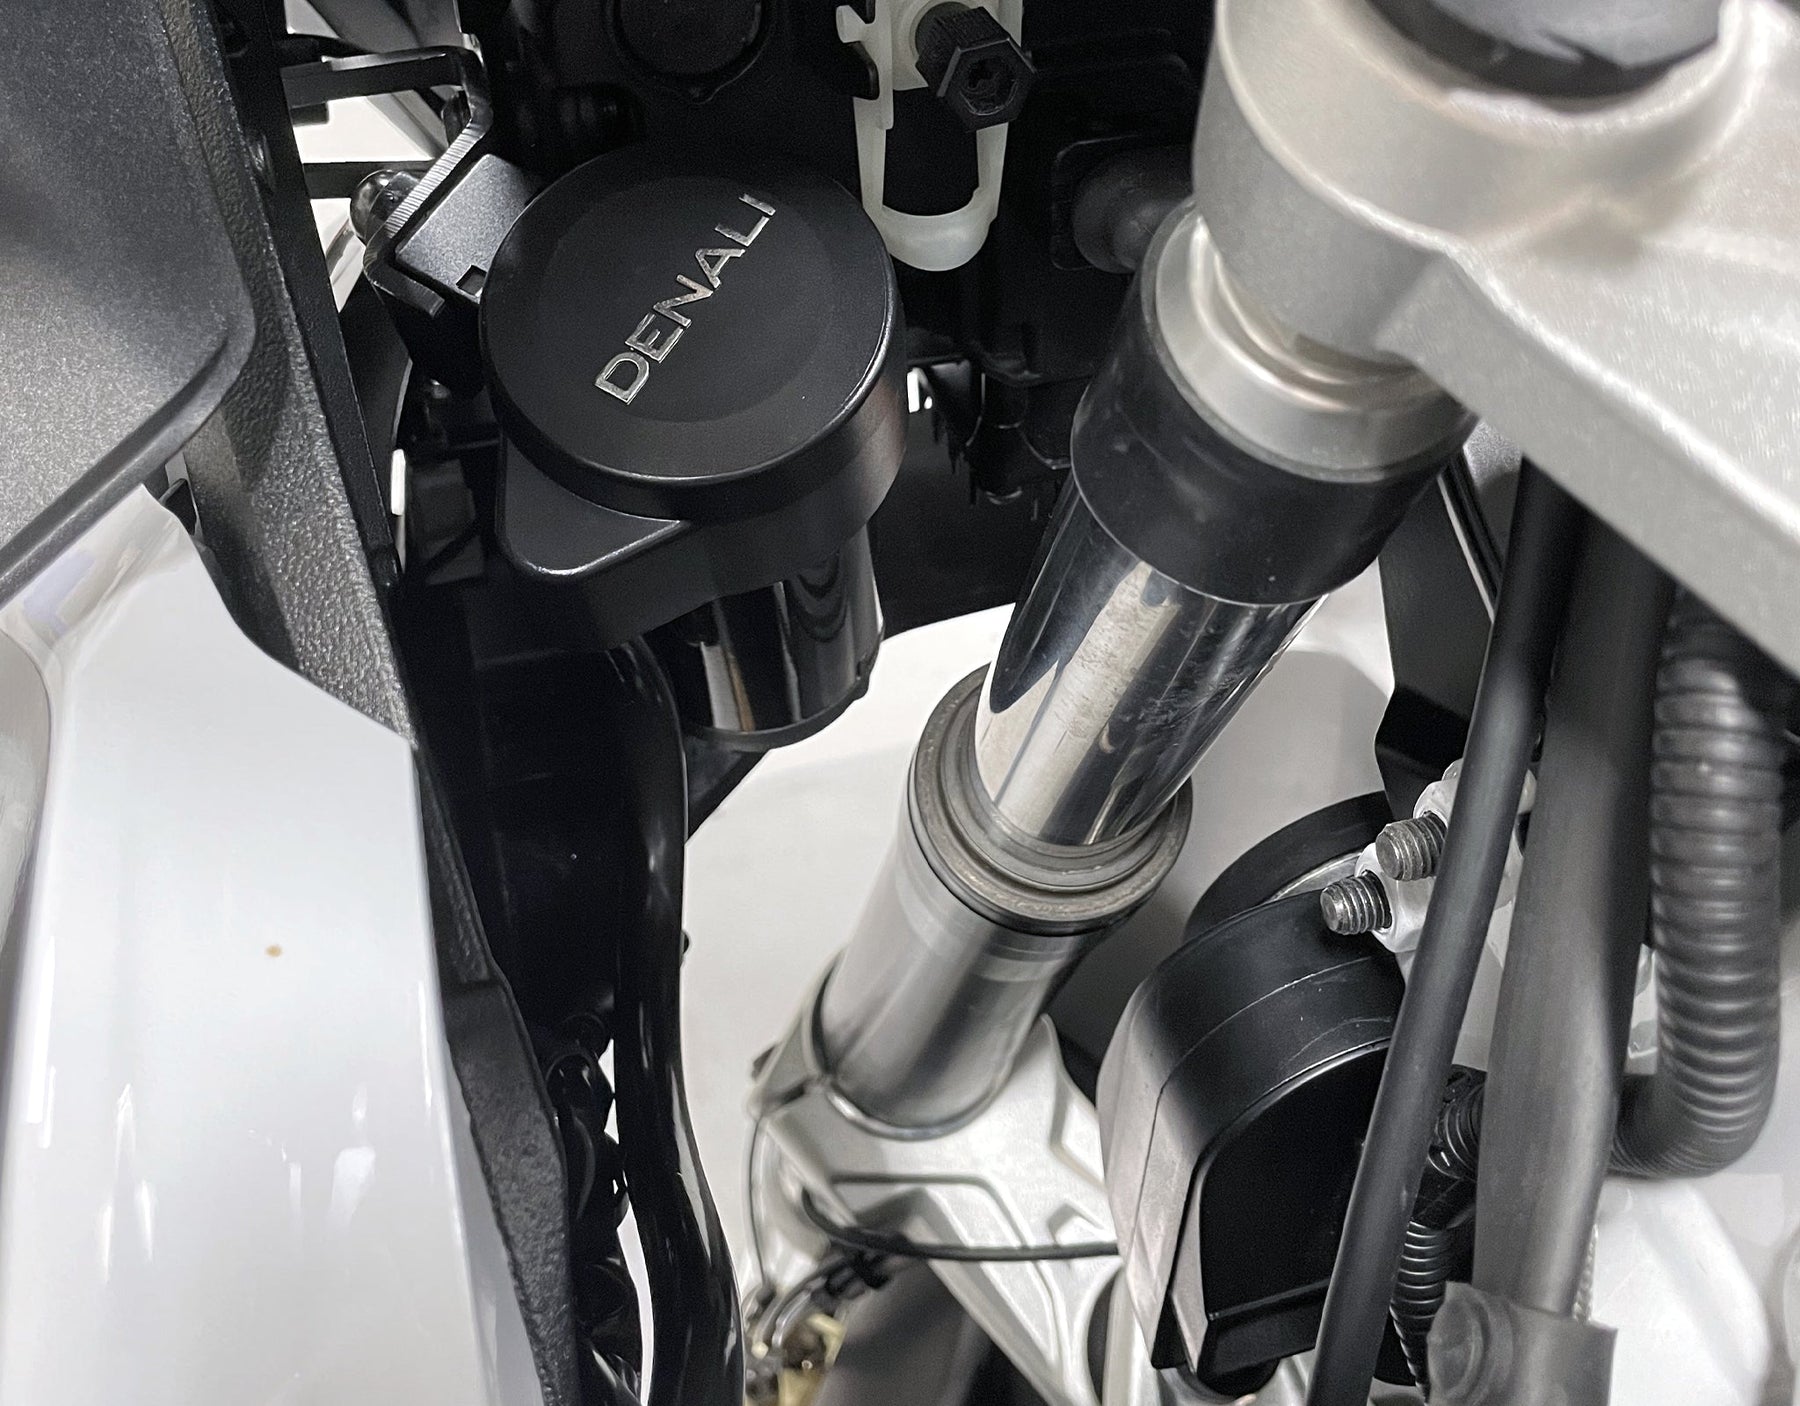 HMT.07.11000 Horn Mount - BMW R1200GS '15-18, R1200GSA '14-'19, R1250GS '19-'22 & R1250GSA '19-'22 Does not fit '21- models with adaptive headlight option